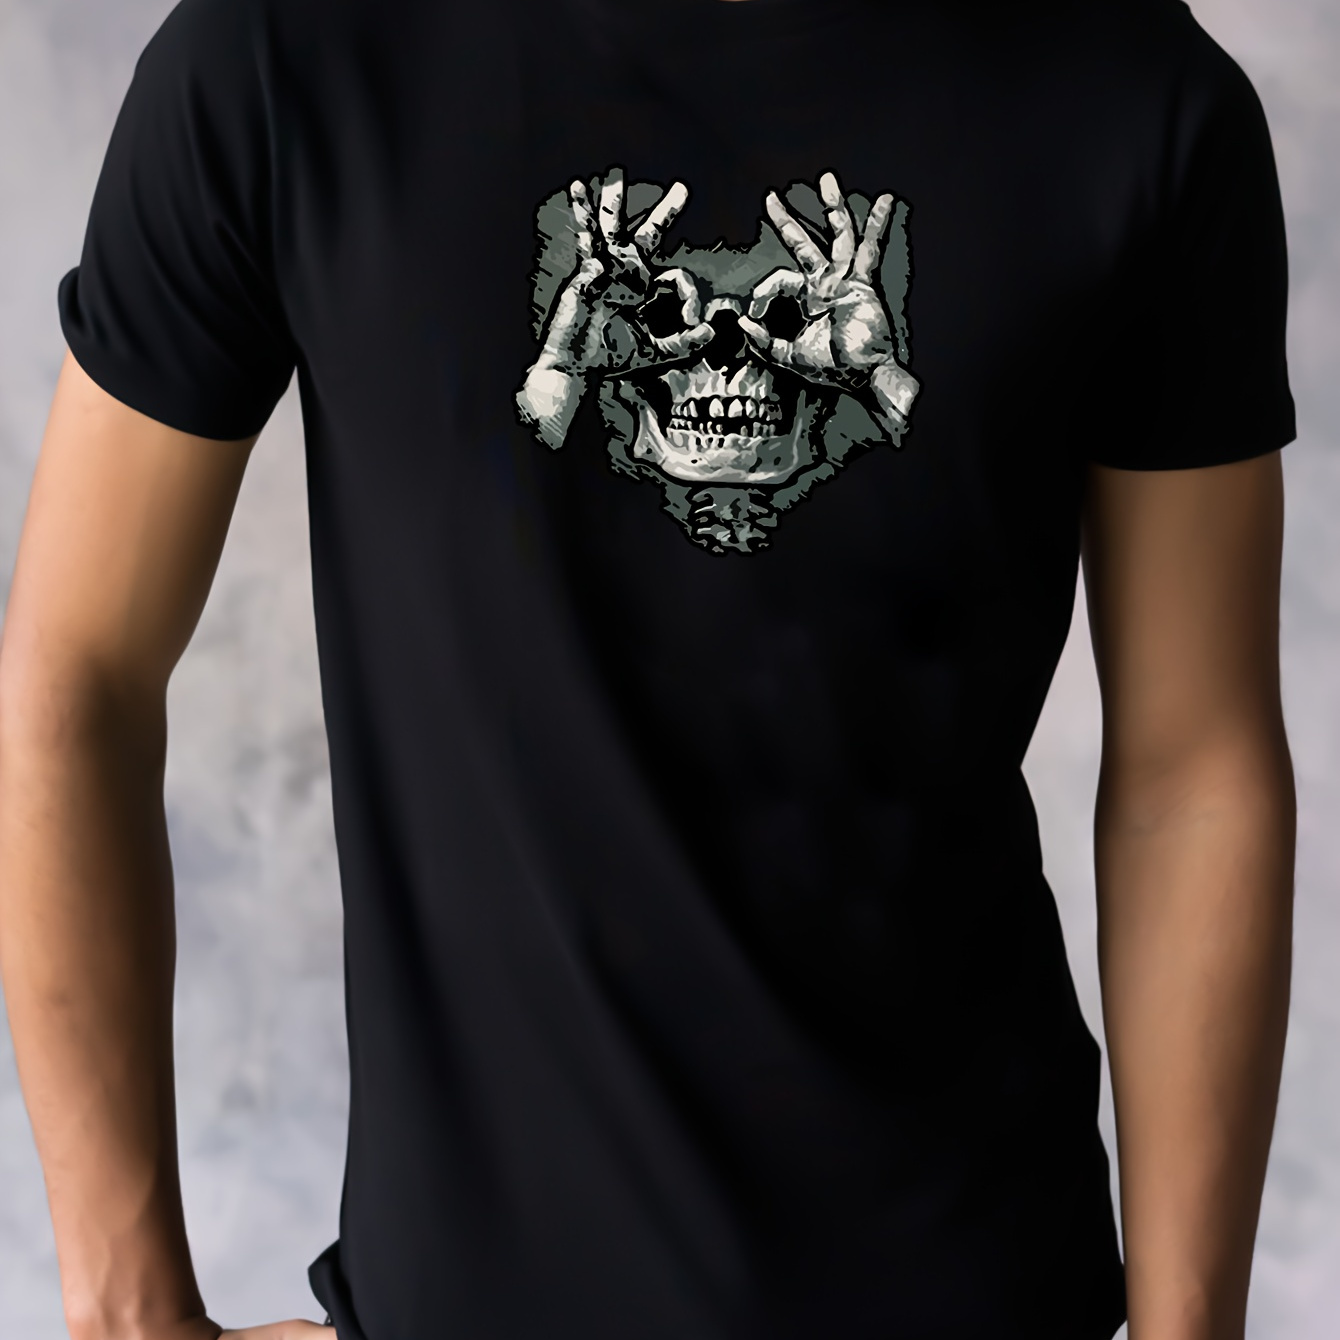 

Skull With Hand Gesture Print Men's T-shirt, Casual Short Sleeve Crew Neck Cotton Top, Men's Summer Clothing, Comfy, Breathable And Versatile Fashion